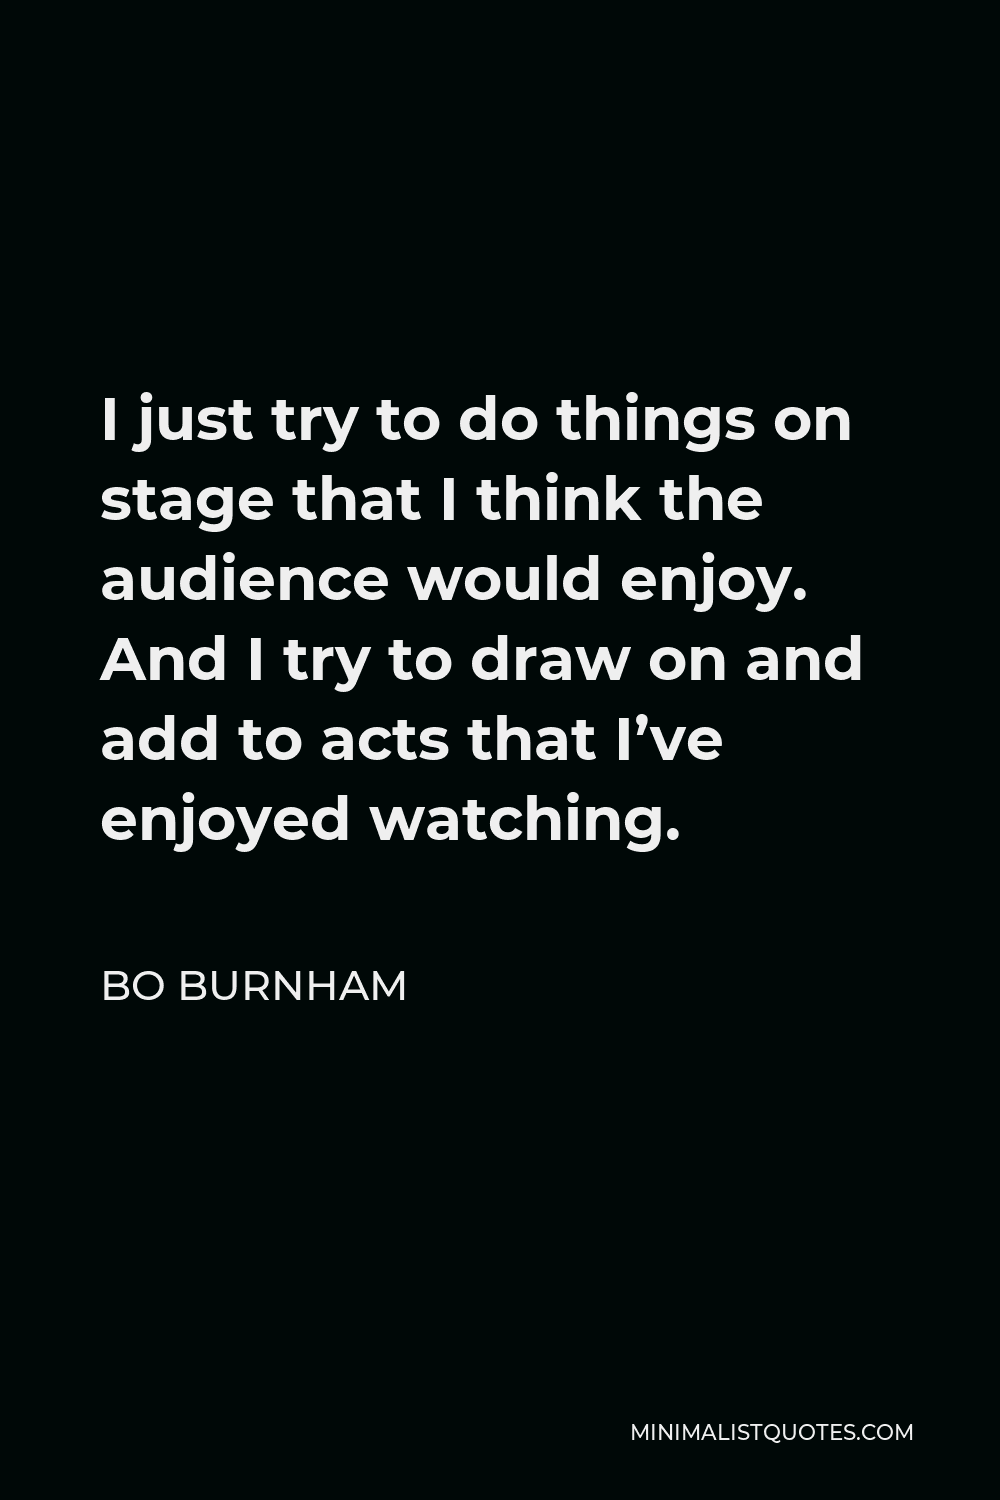 Bo Burnham Quote - I just try to do things on stage that I think the audience would enjoy. And I try to draw on and add to acts that I’ve enjoyed watching.